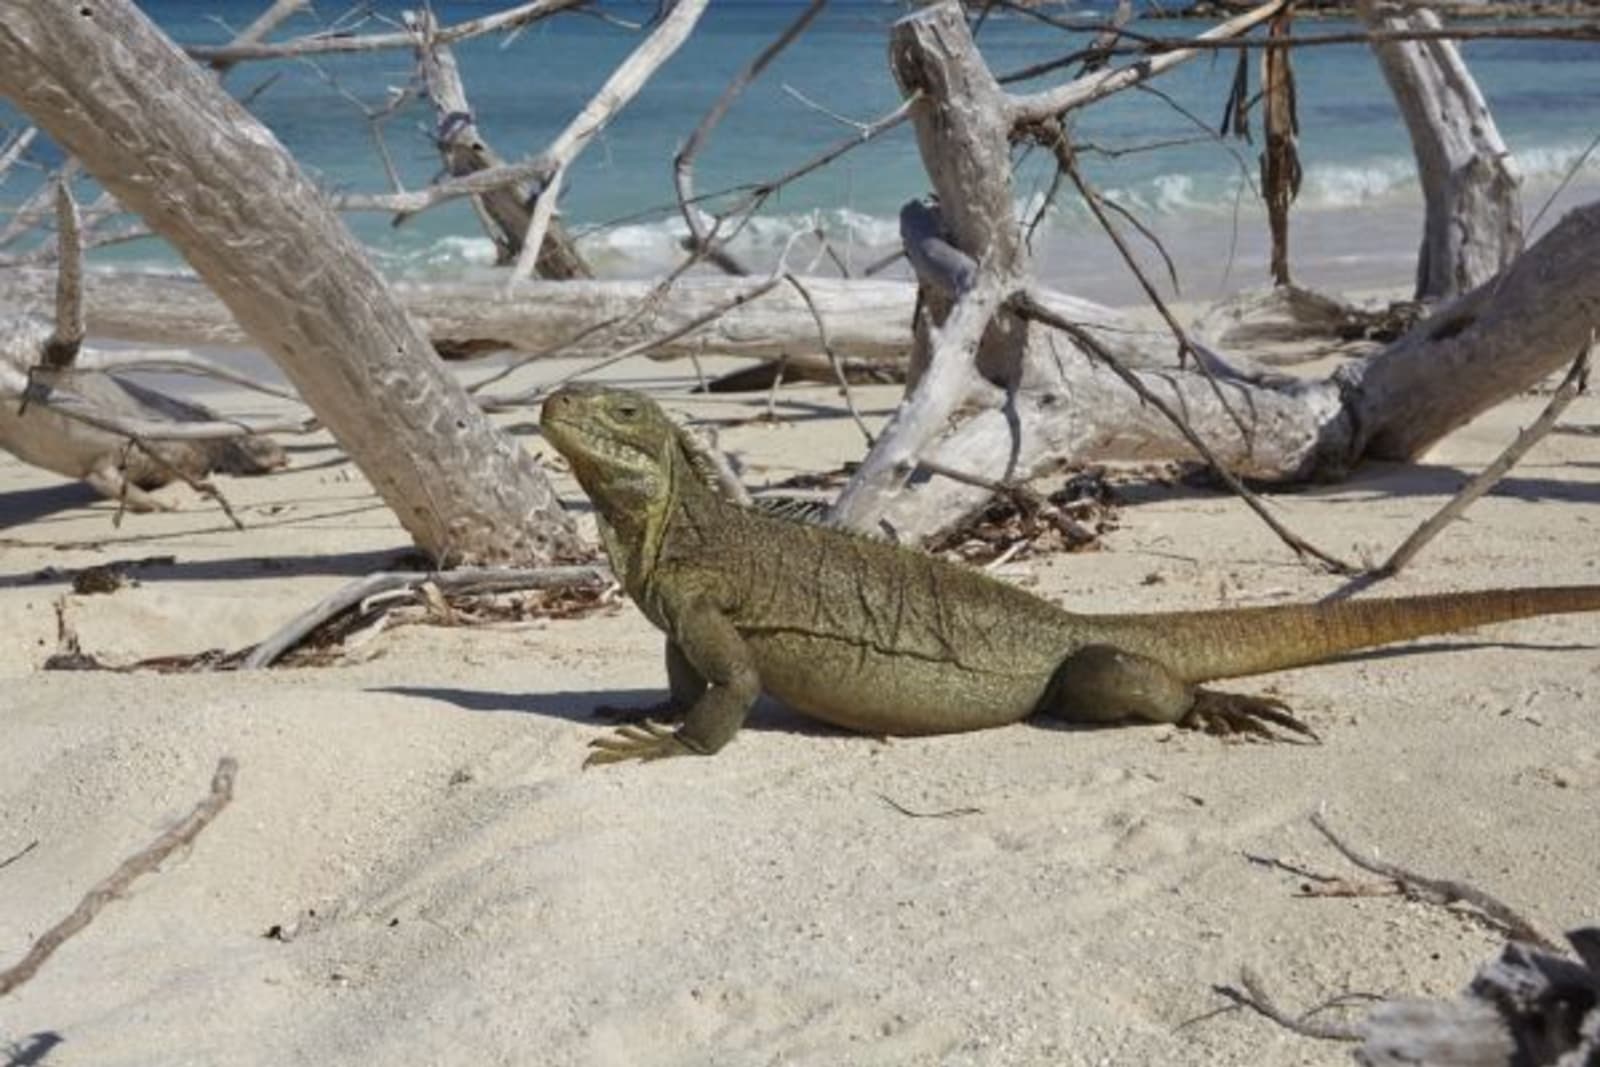 An Iguana siting on a beach with tree branches on the ground behind